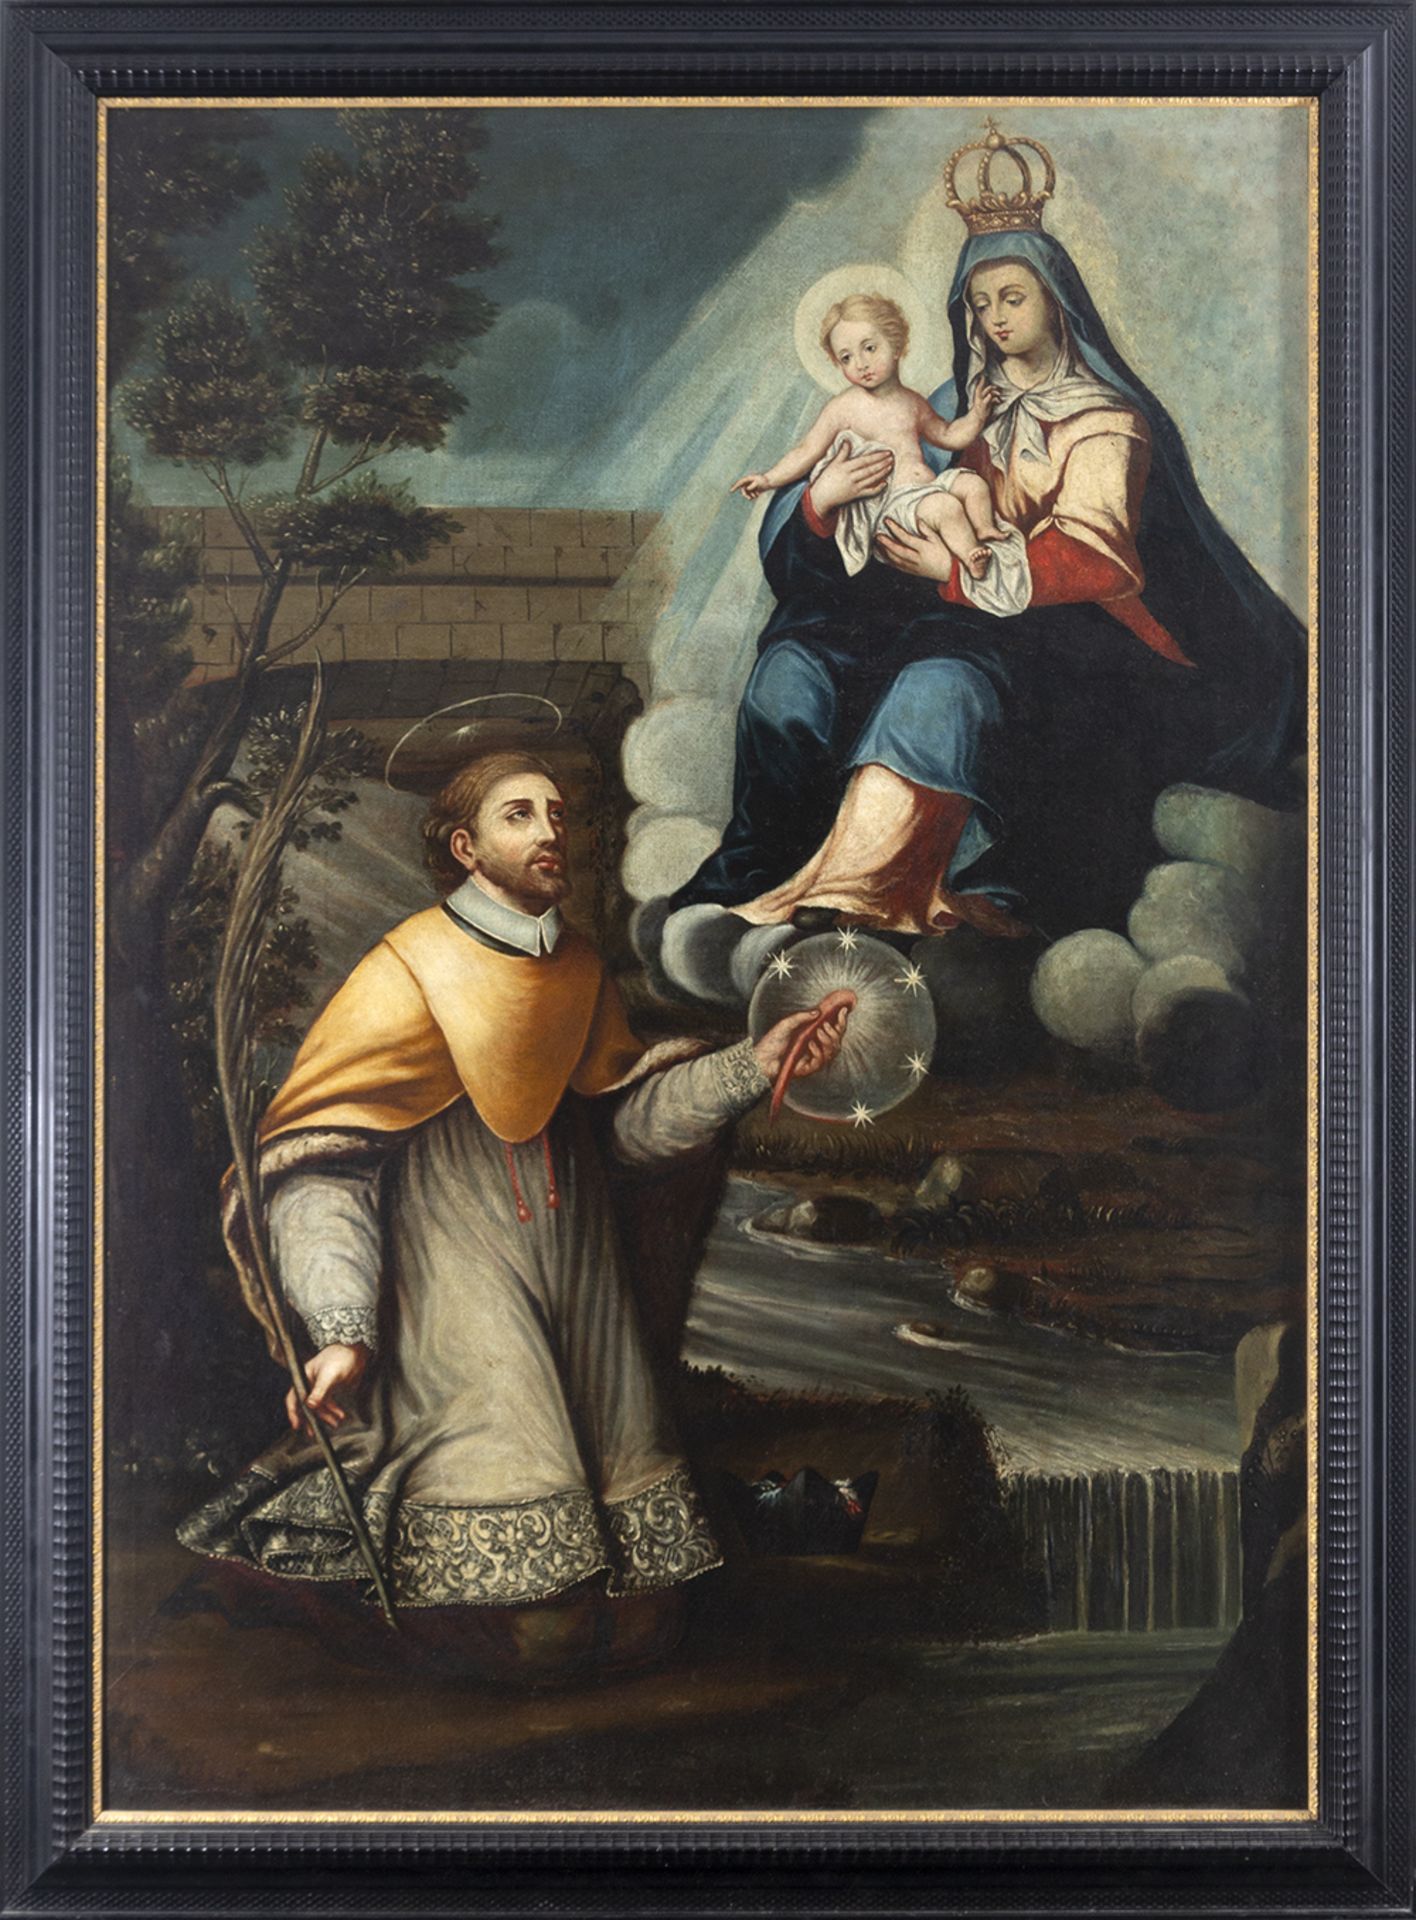 Colonial school, Mexico, 17th century. Appearance of the Virgin to San Juan Nepomuceno.